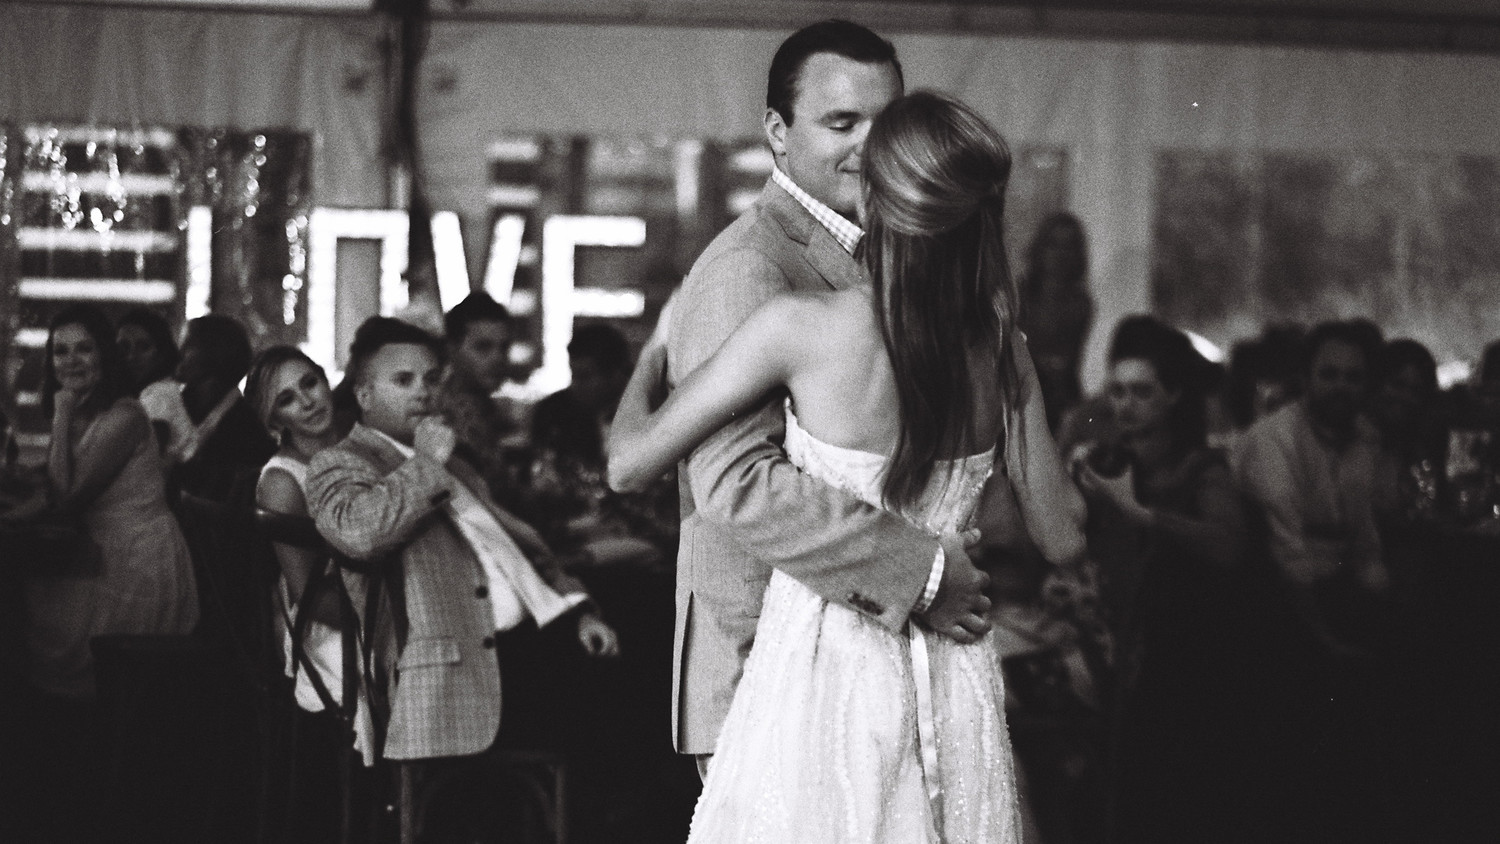 16 Songs Guaranteed To Get All Your Guests On The Dance Floor